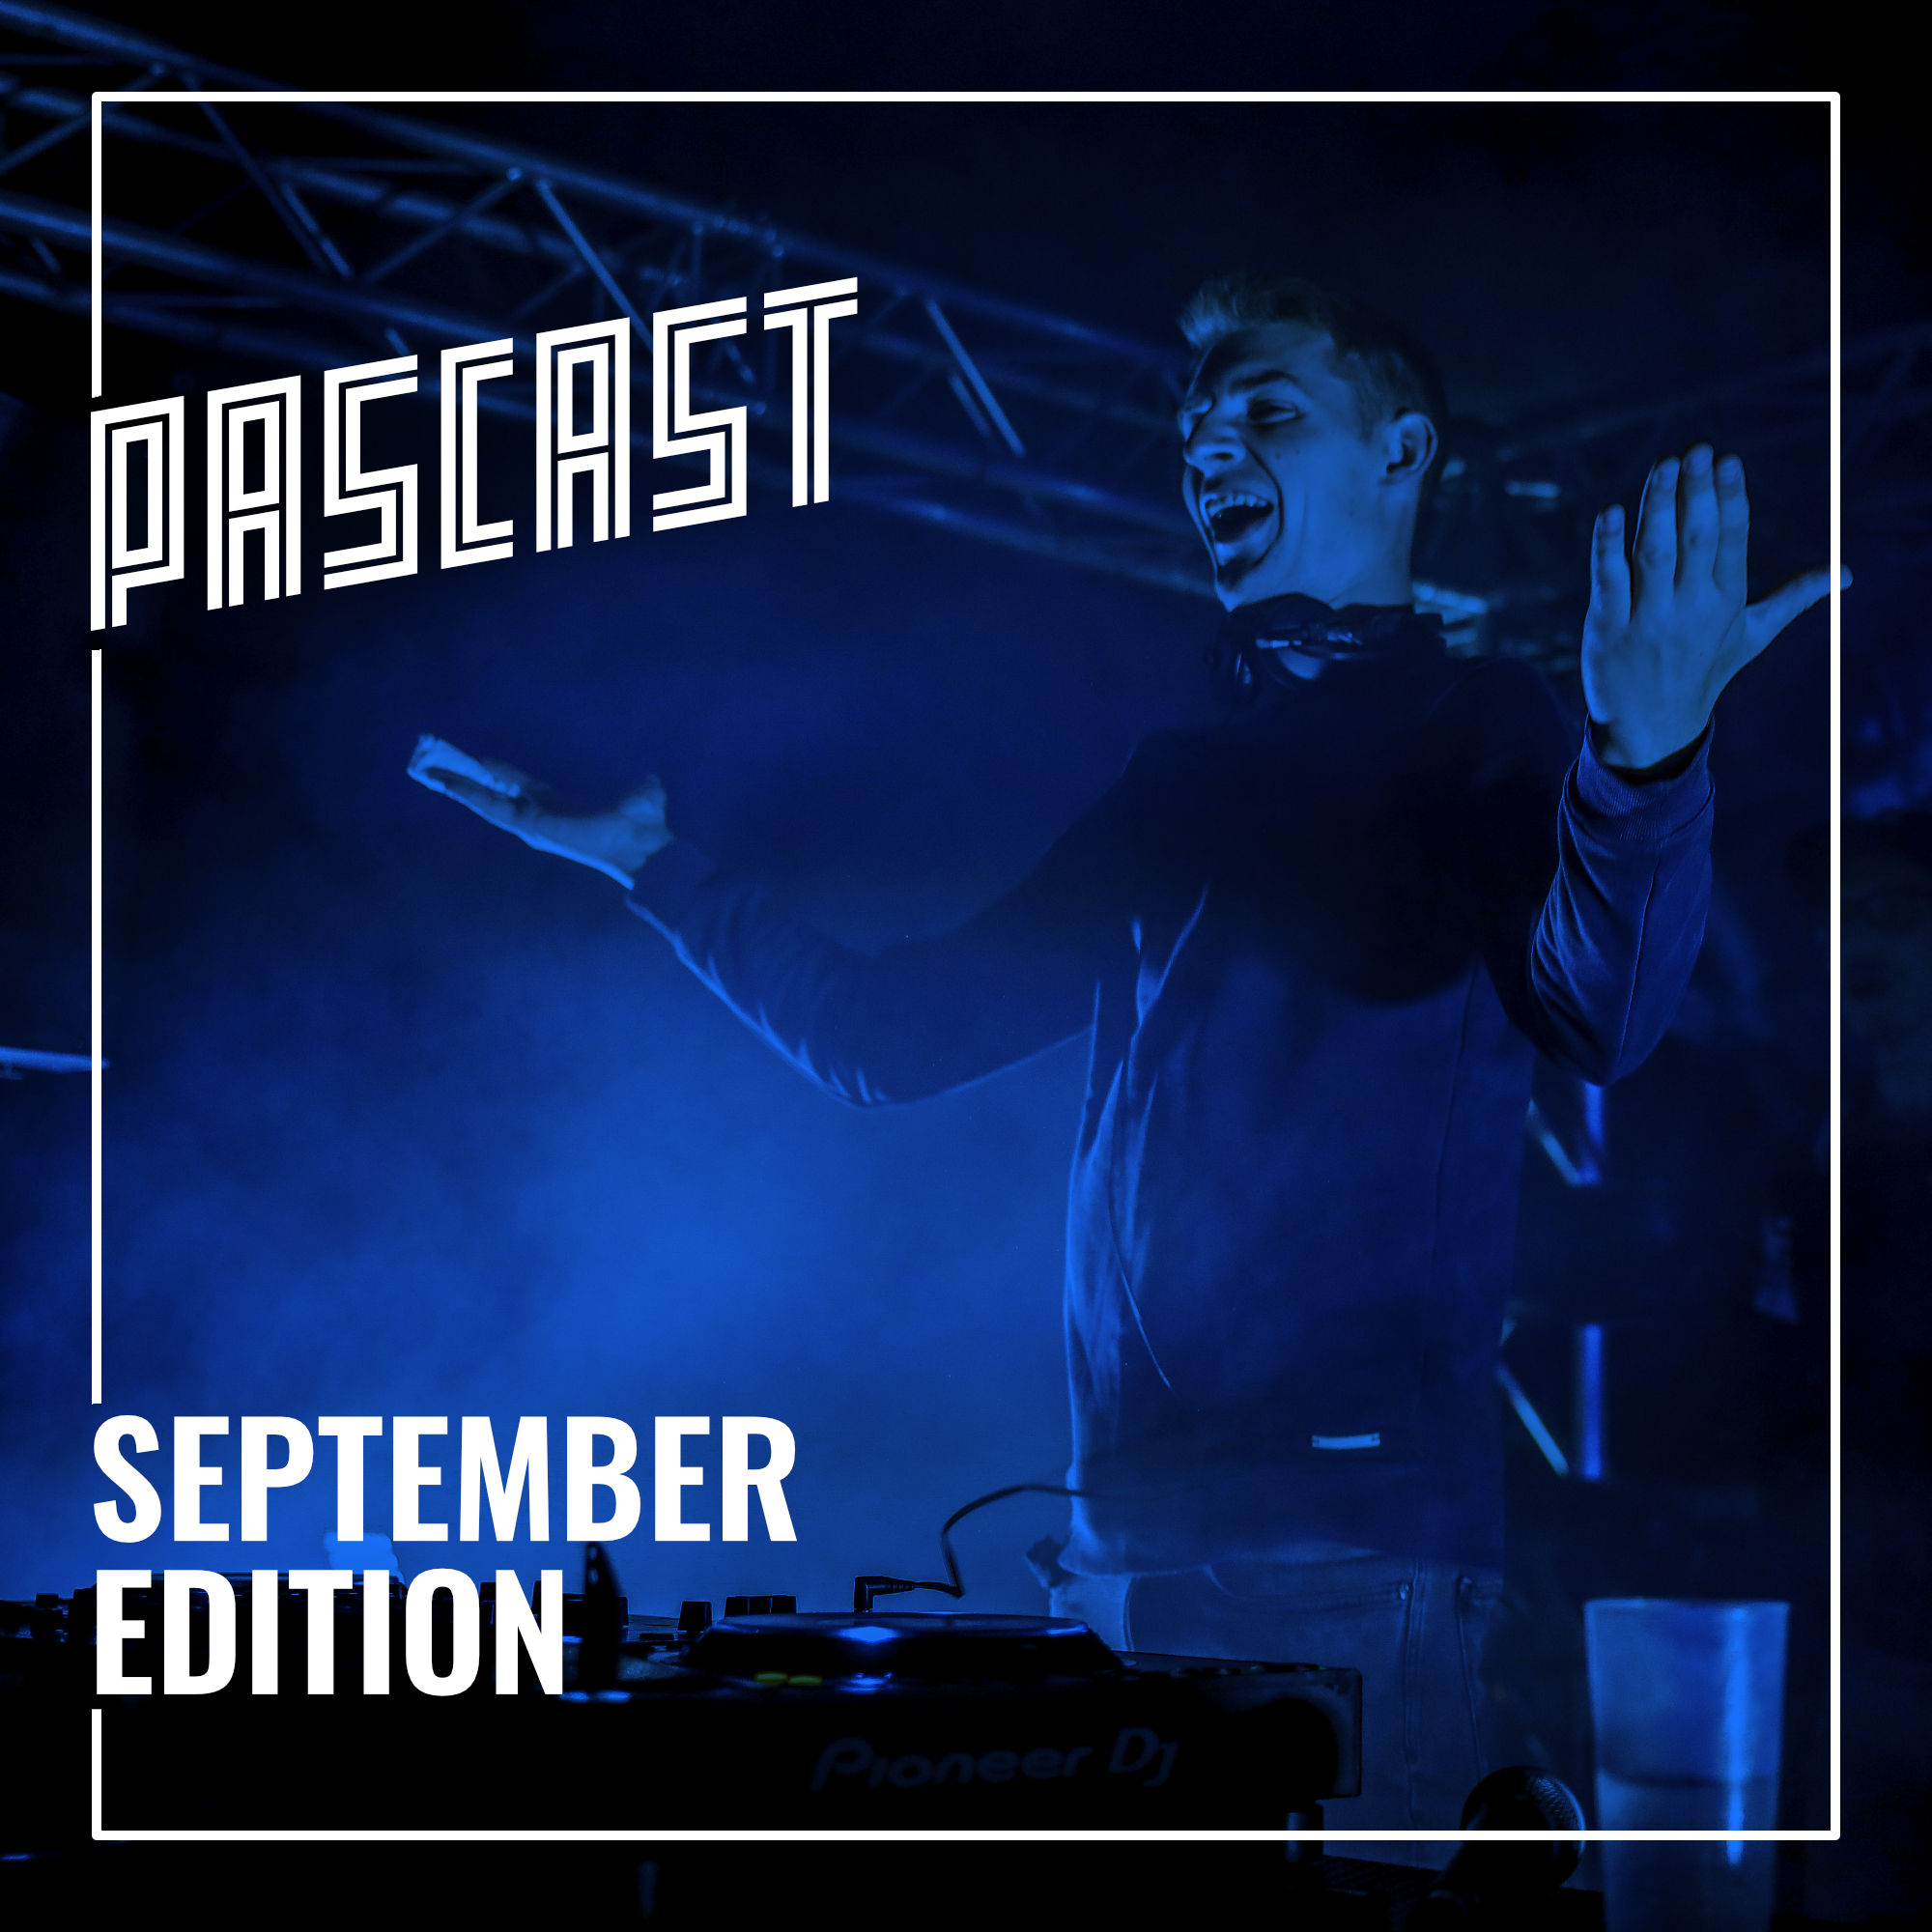 PASCAST #32 - September Edition